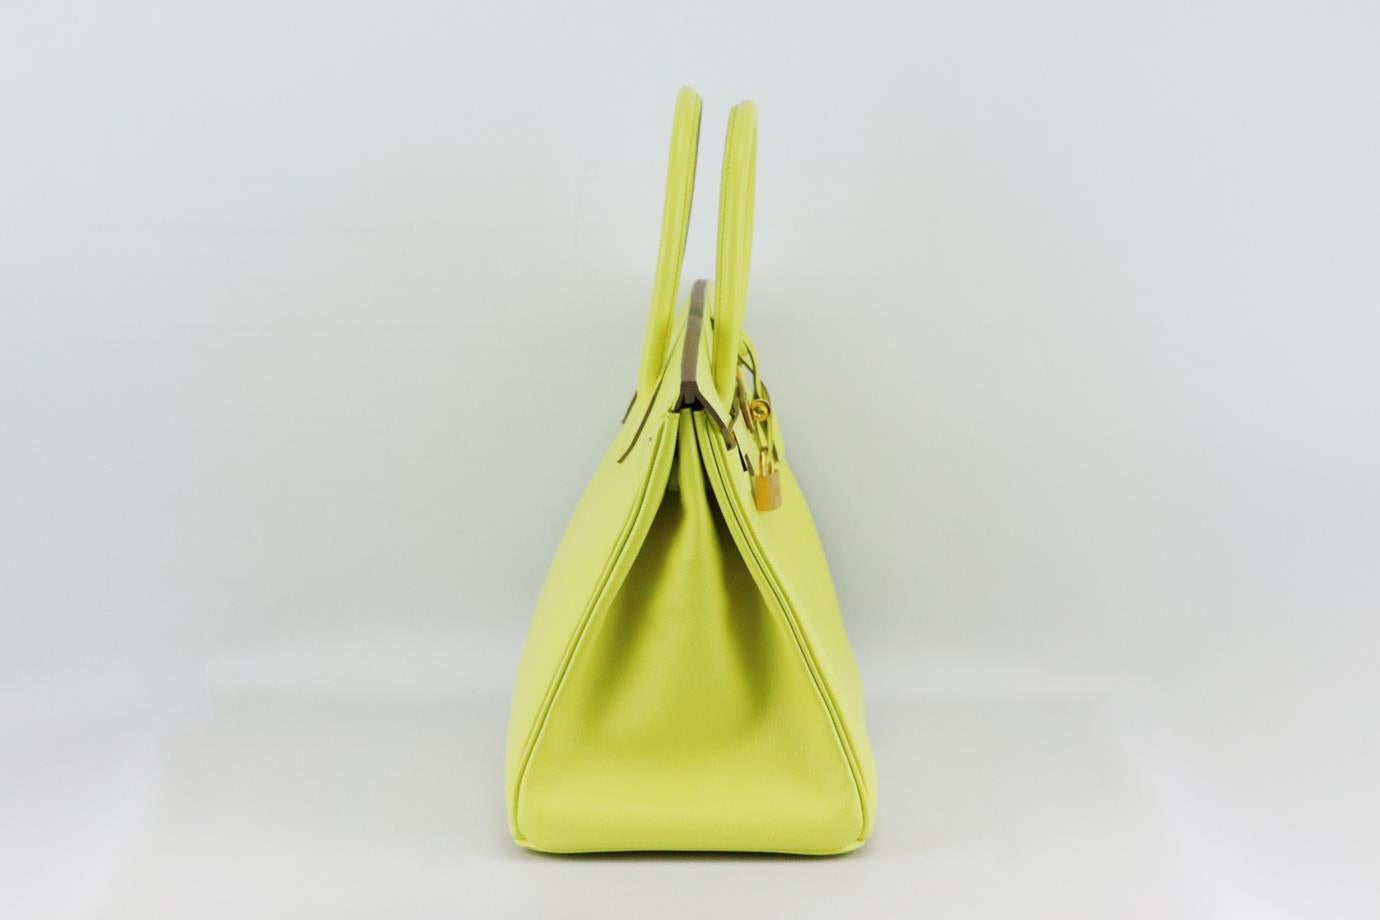 Hermès 2011 Birkin 35cm Epsom leather bag. Made in France, this beautiful 2011 Hermès ‘Birkin’ handbag has been made from bright-yellow ‘Epsom’ leather exterior in ‘Lime’ with matching interior, this piece is decorated with gold-plated hardware.